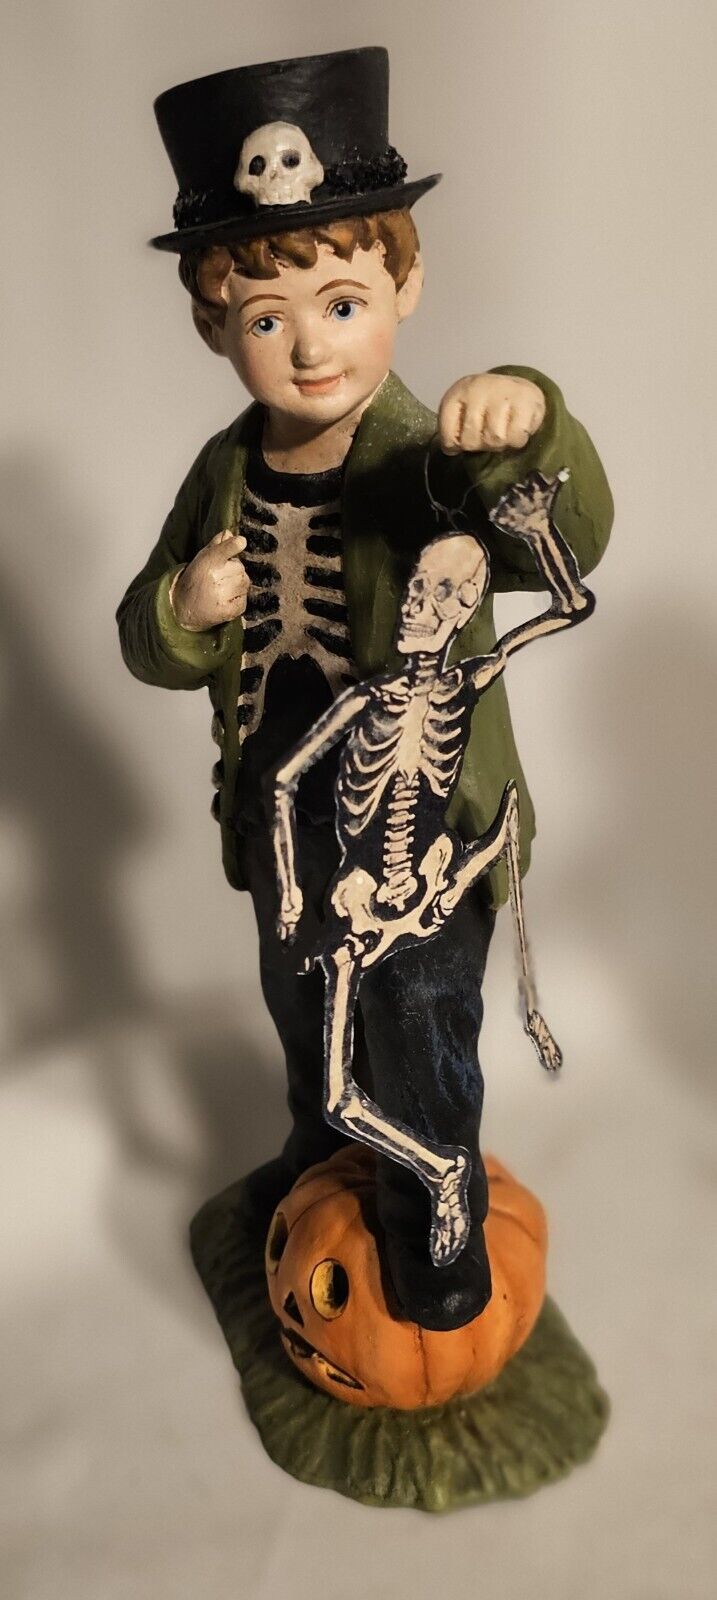 PRIVATE SALE: Bethany Lowe PUPPET BOY Halloween Retired 2017